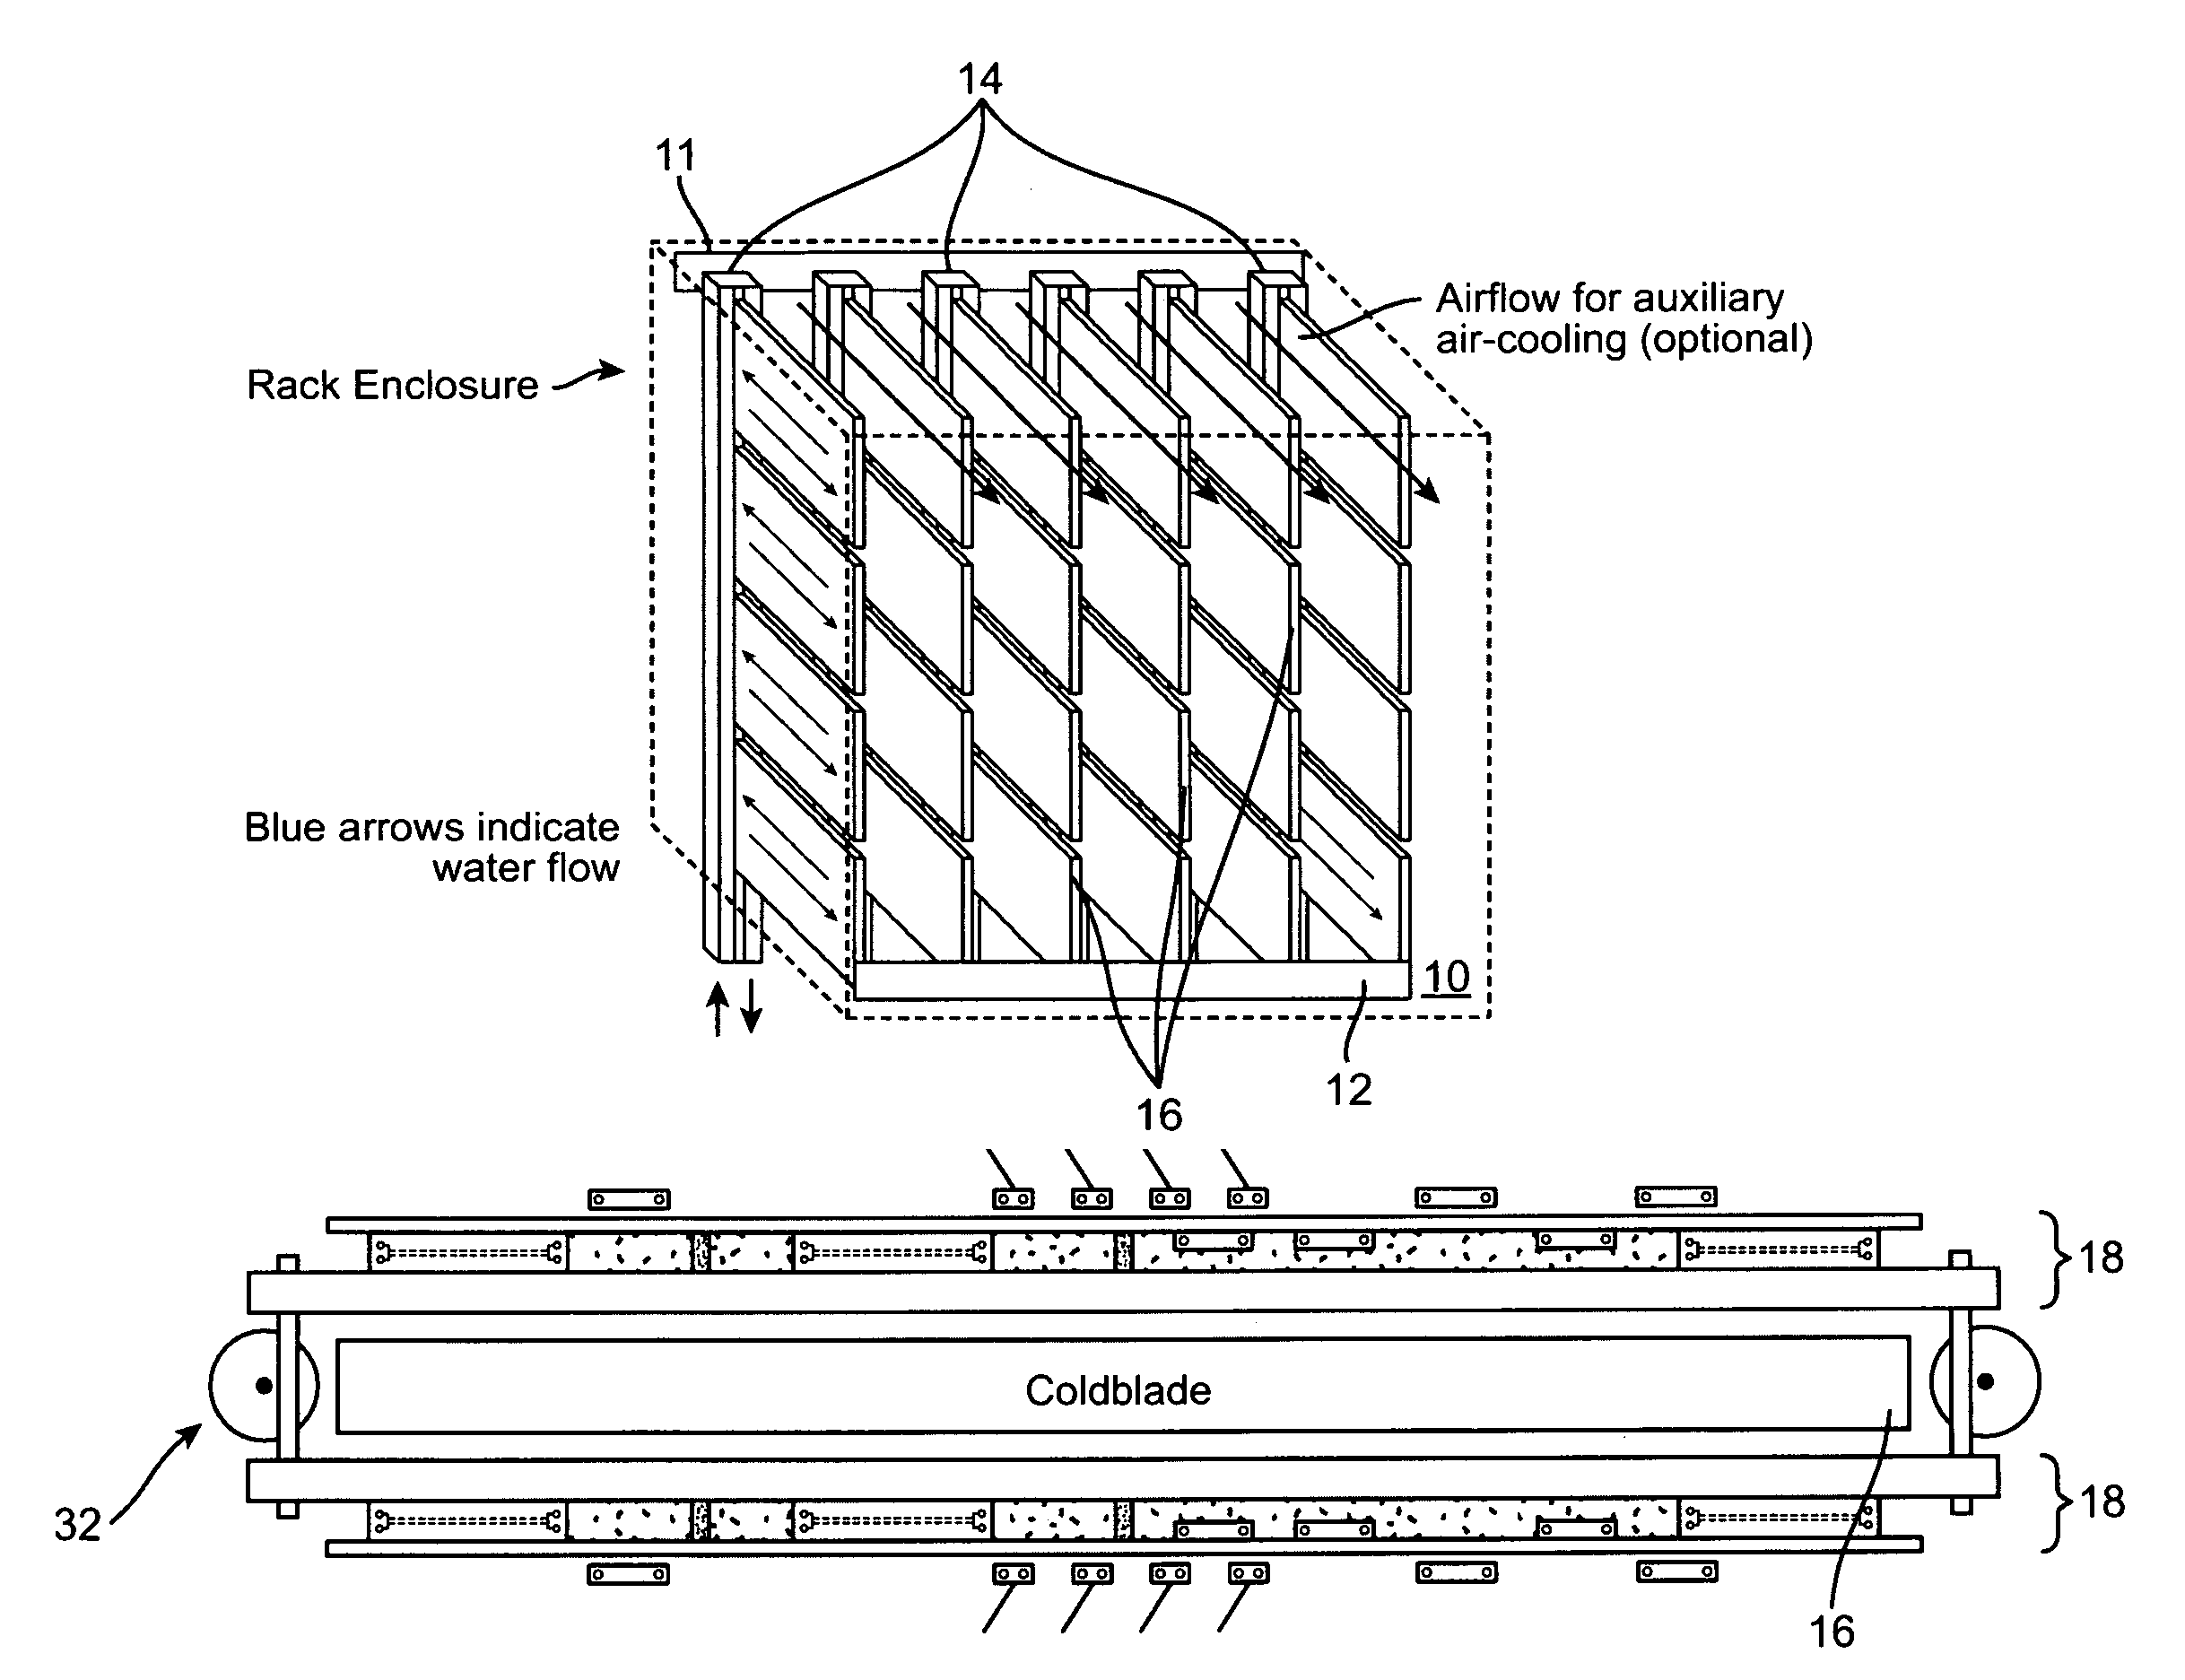 Method for high-density packaging and cooling of high-powered compute and storage server blades